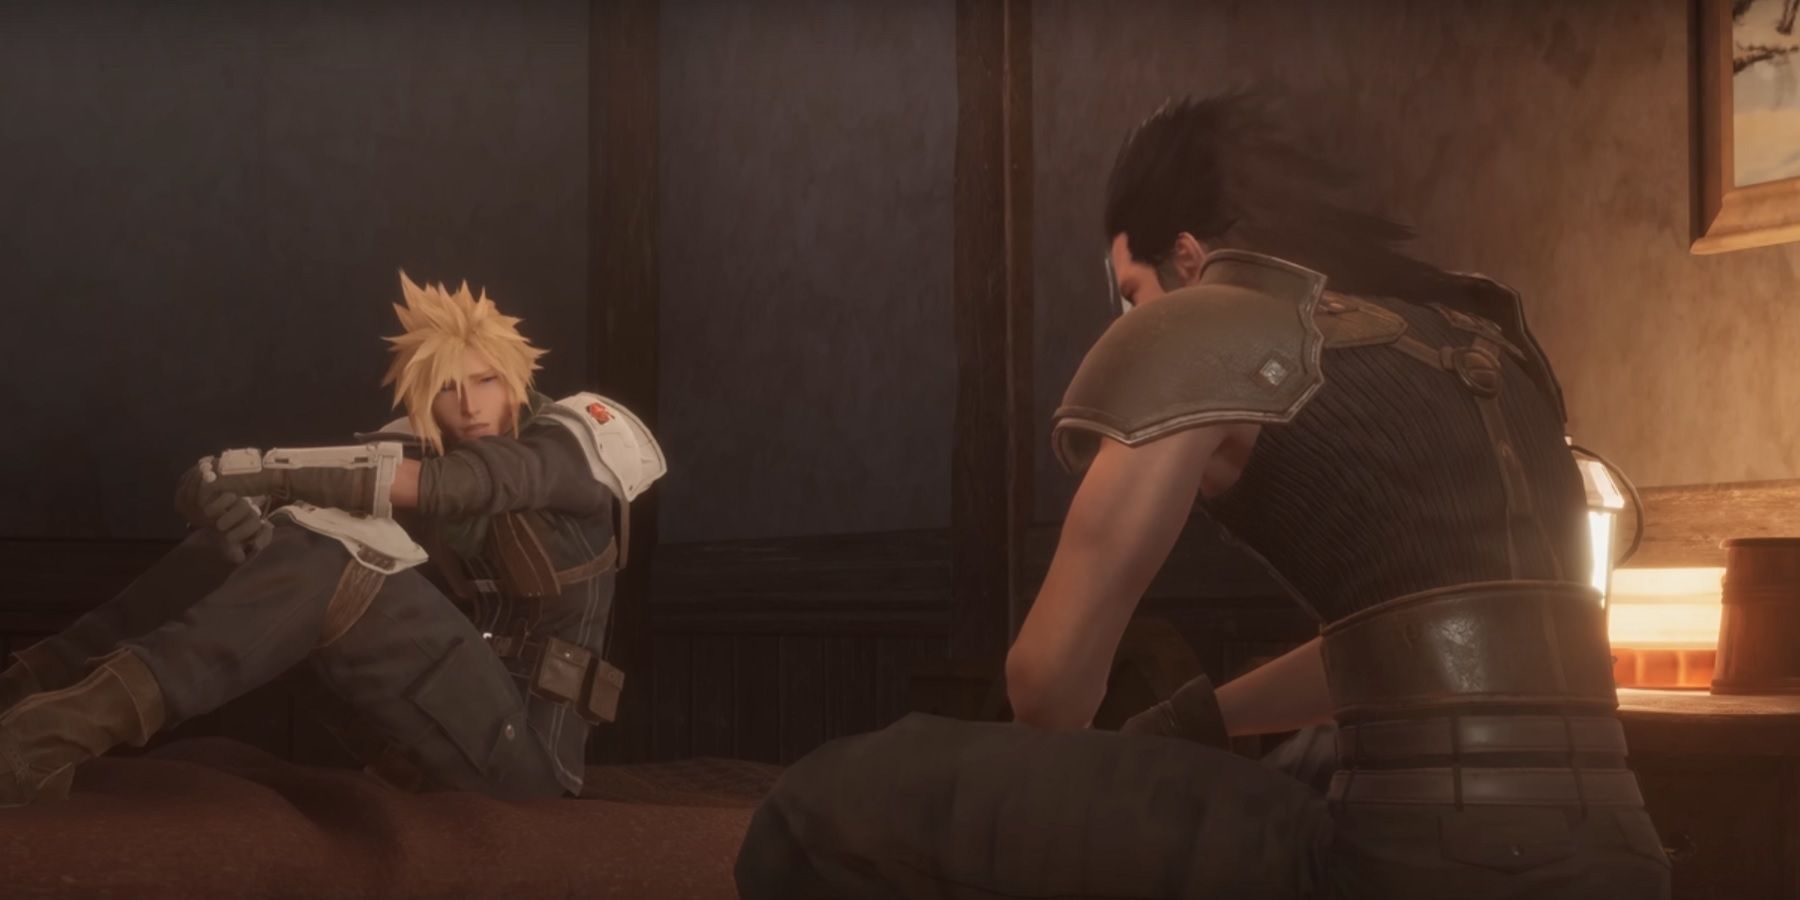 Zack and Cloud talk about SOLDIER while in Nibelheim in Crisis Core Reunion.